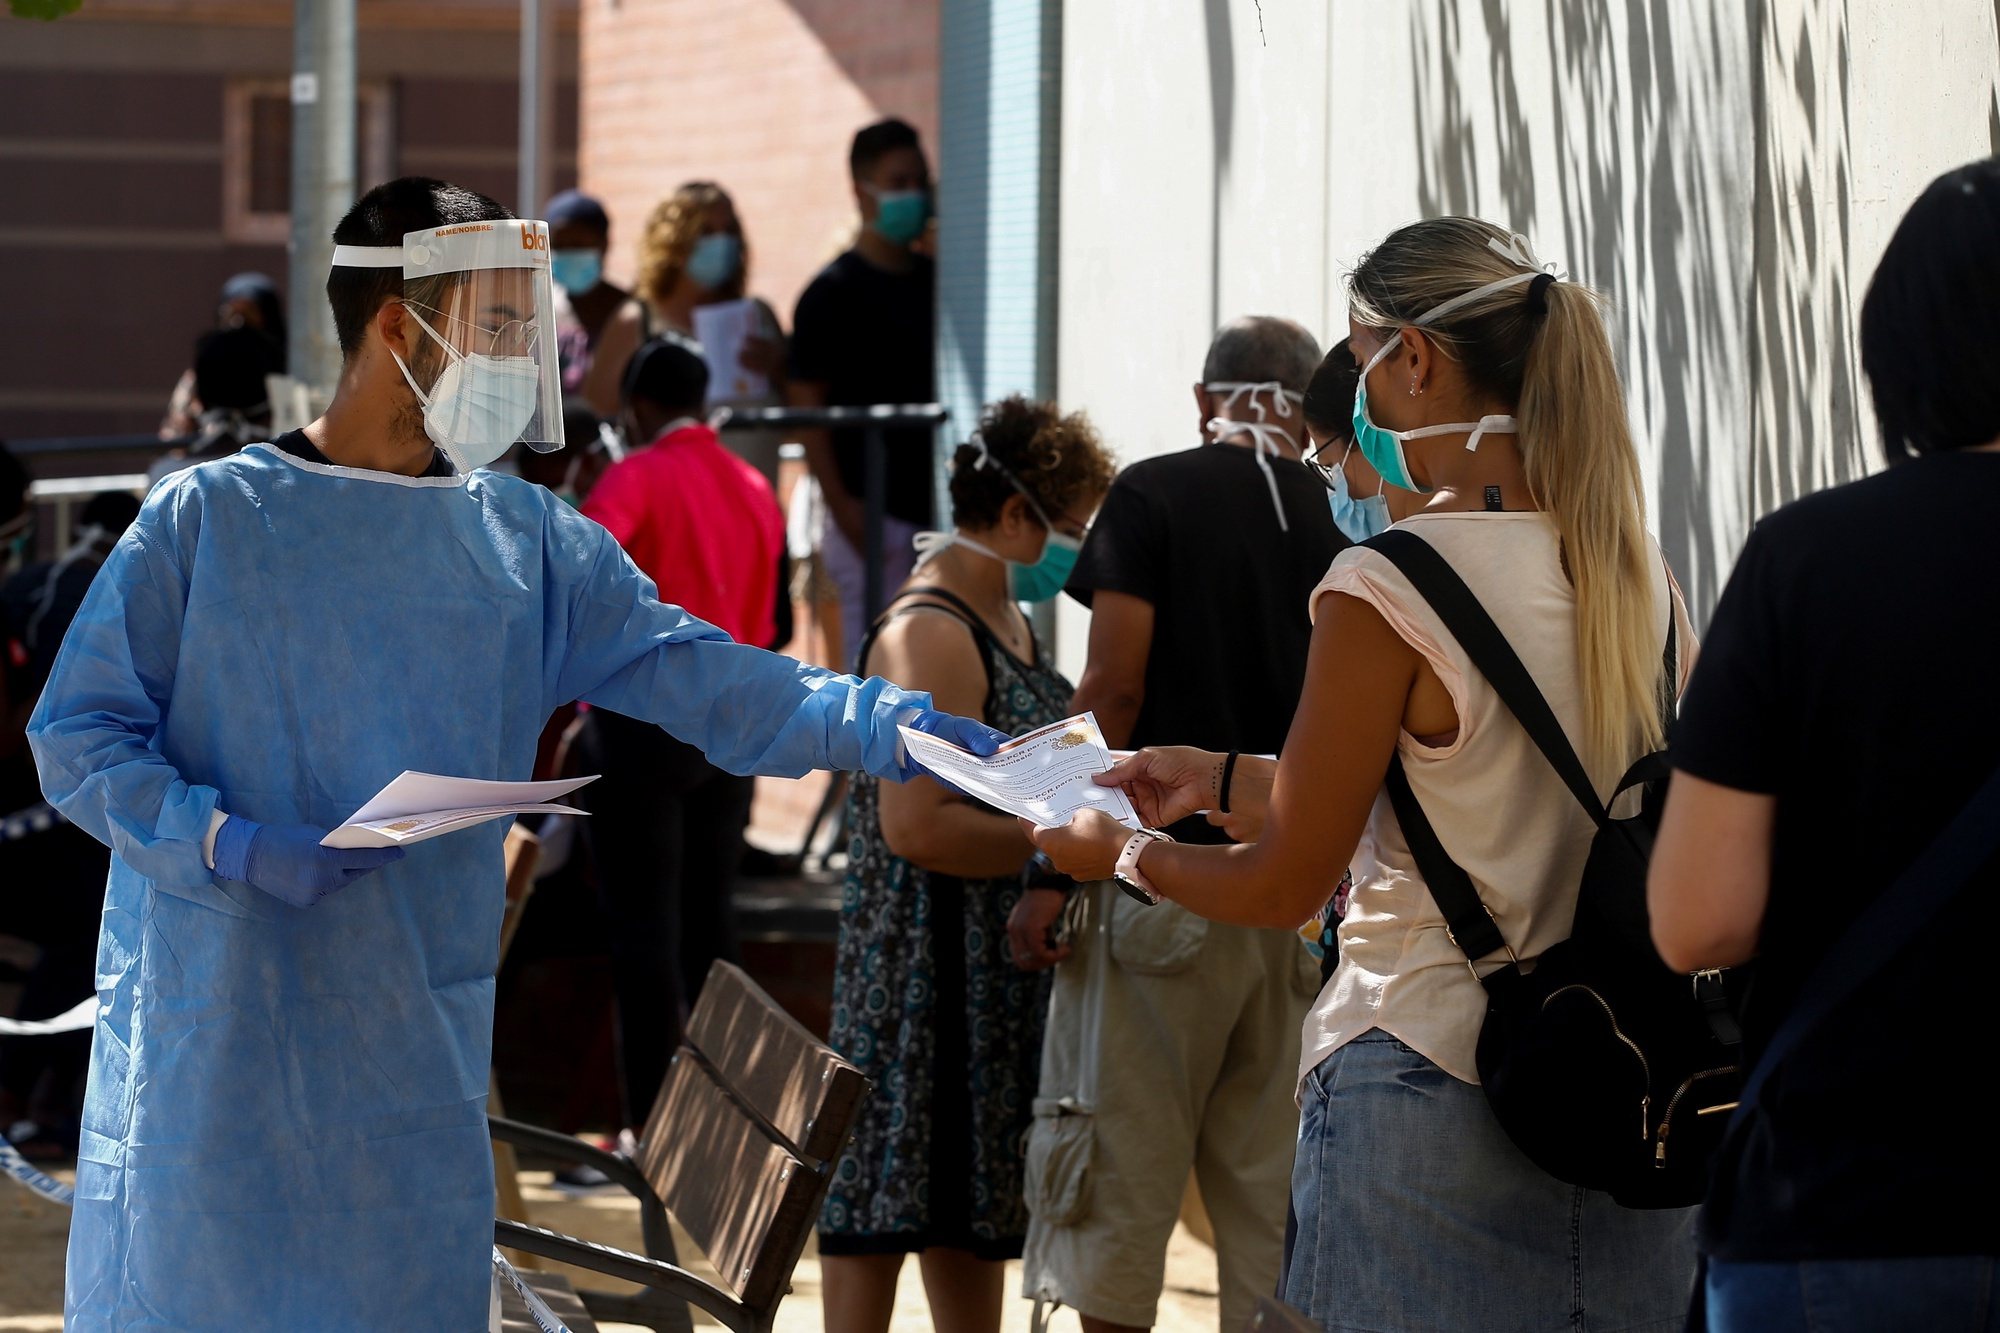 epa08624520 A health worker informs people queuing at a Health Center in Canovellas, Barcelona, Spain, where a massive PCR screening test is being carried out 25 August 2020, in order to detect asymptomatic COVID-19 cases.  EPA/Quique Garcia